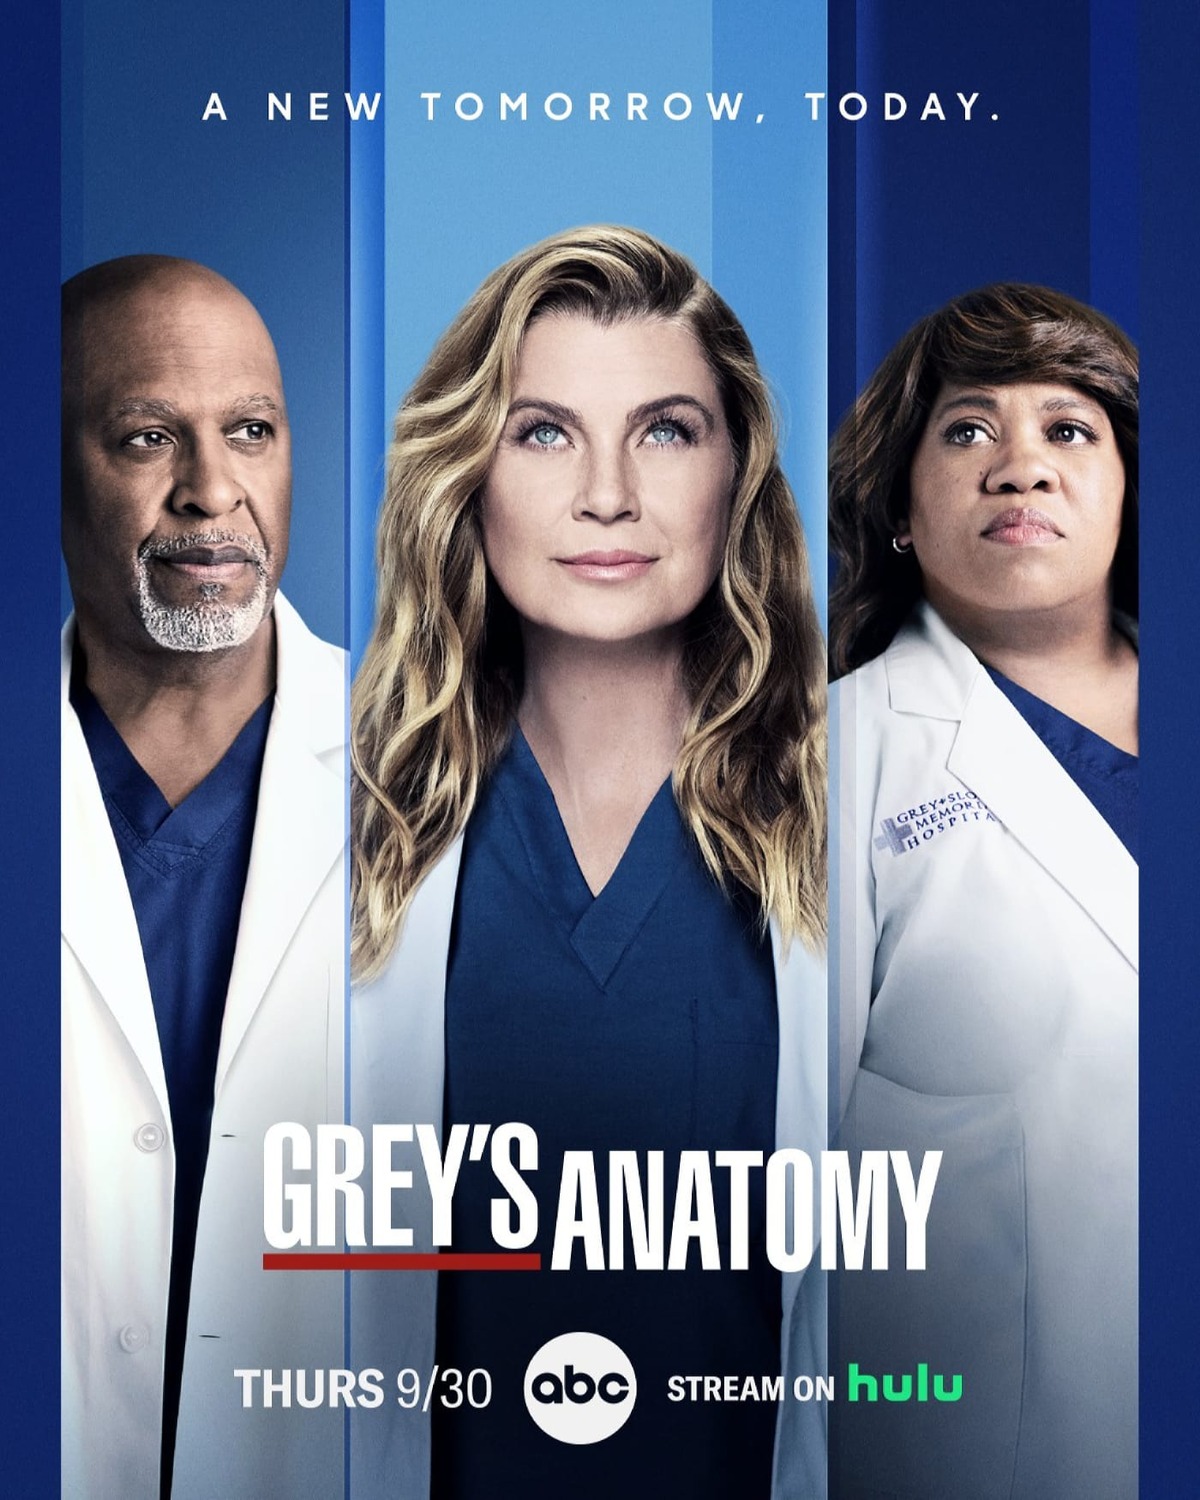 Extra Large TV Poster Image for Grey's Anatomy (#24 of 29)